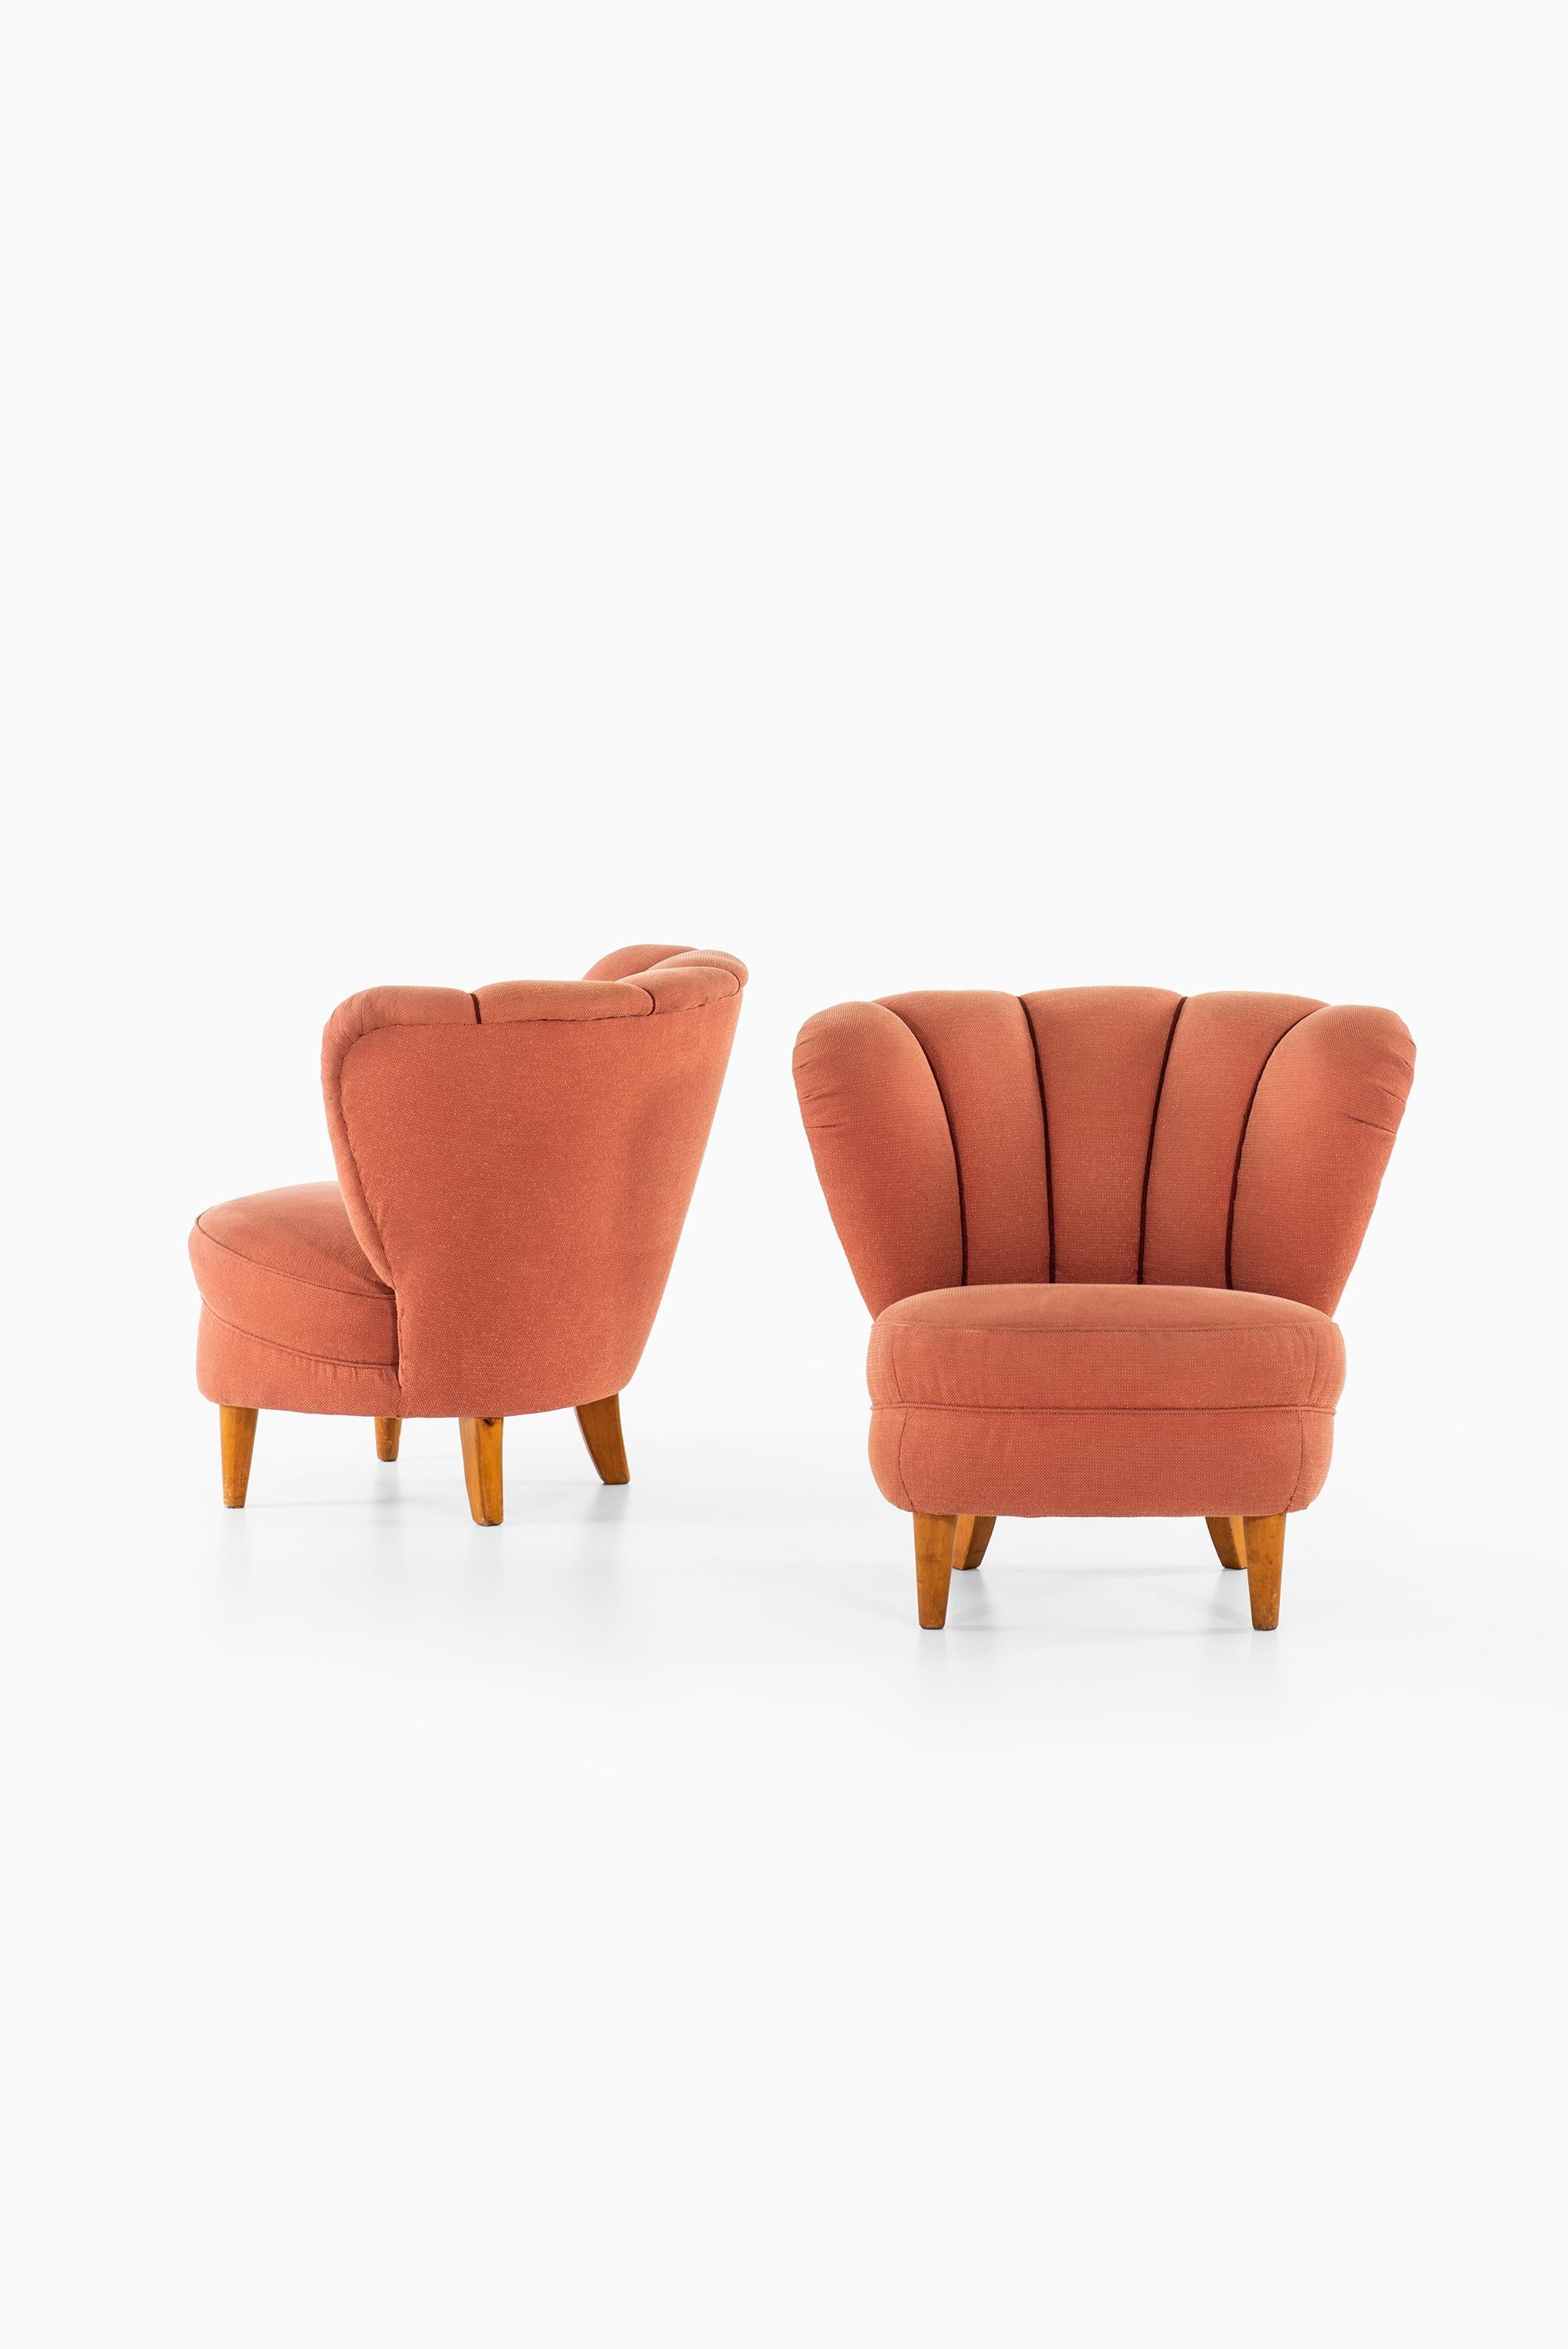 Mid-20th Century Easy Chairs in the Manner of Otto Schulz Produced in Sweden